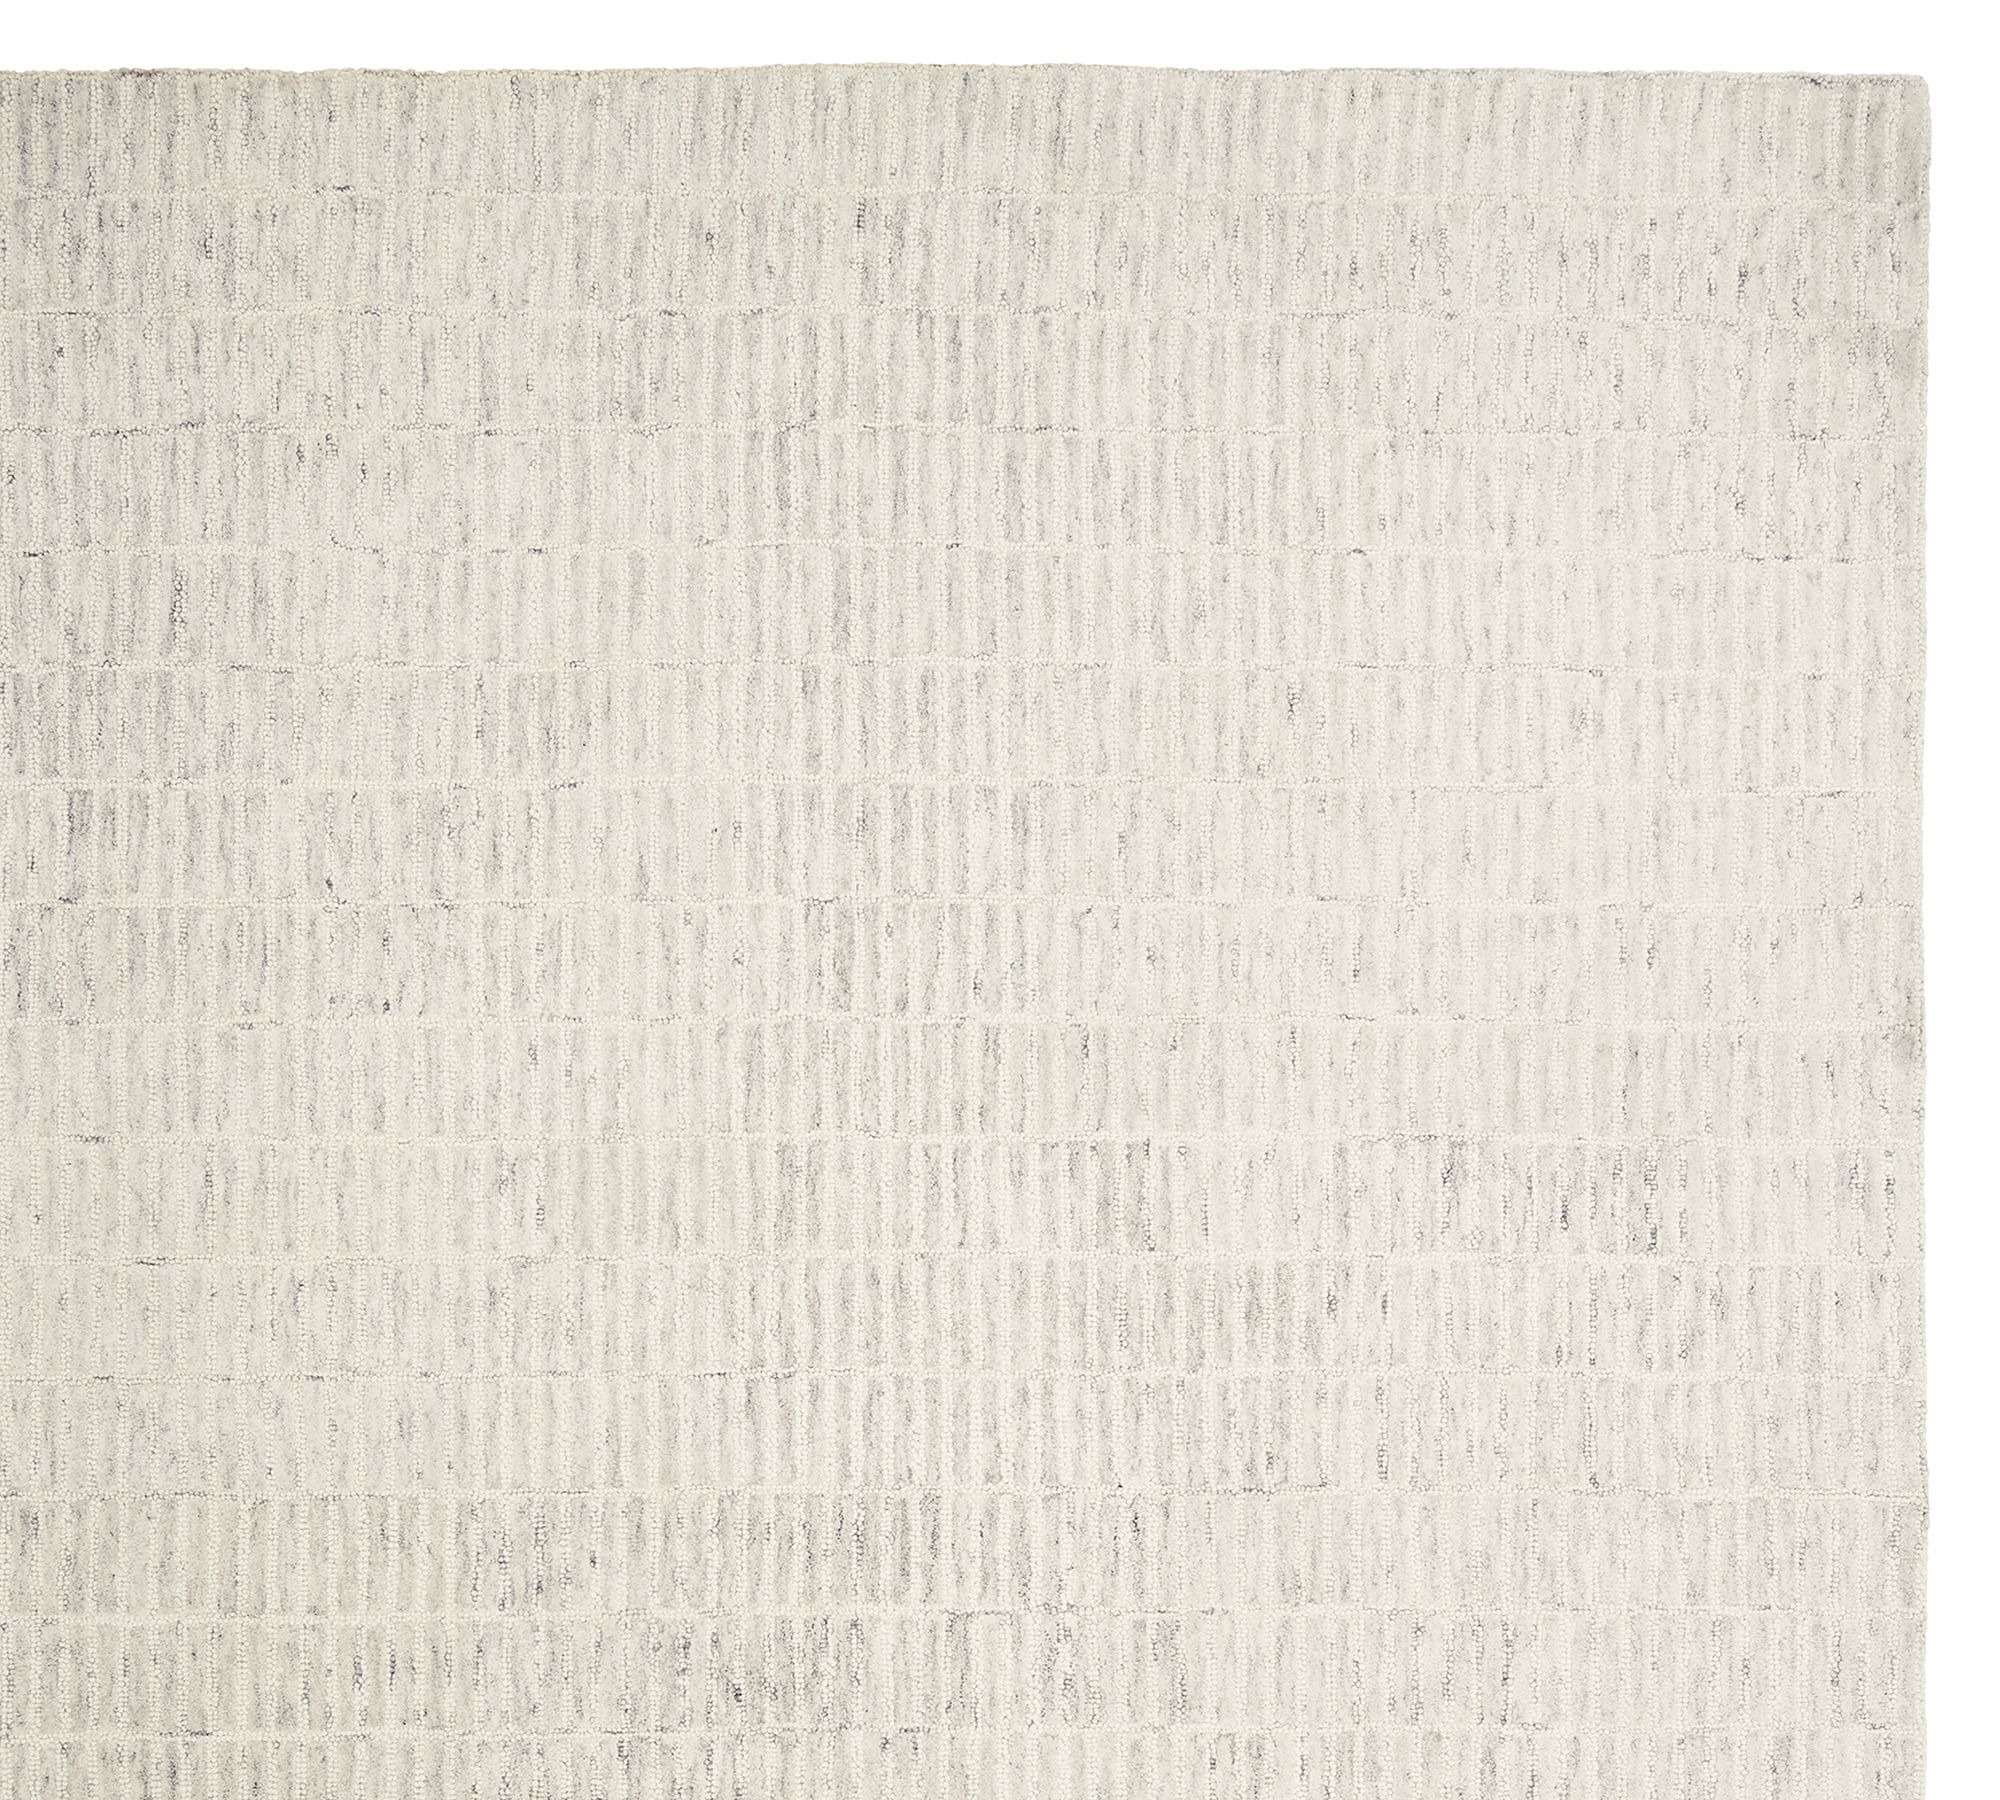 Capitola Rug Swatch - Free Returns Within 30 Days